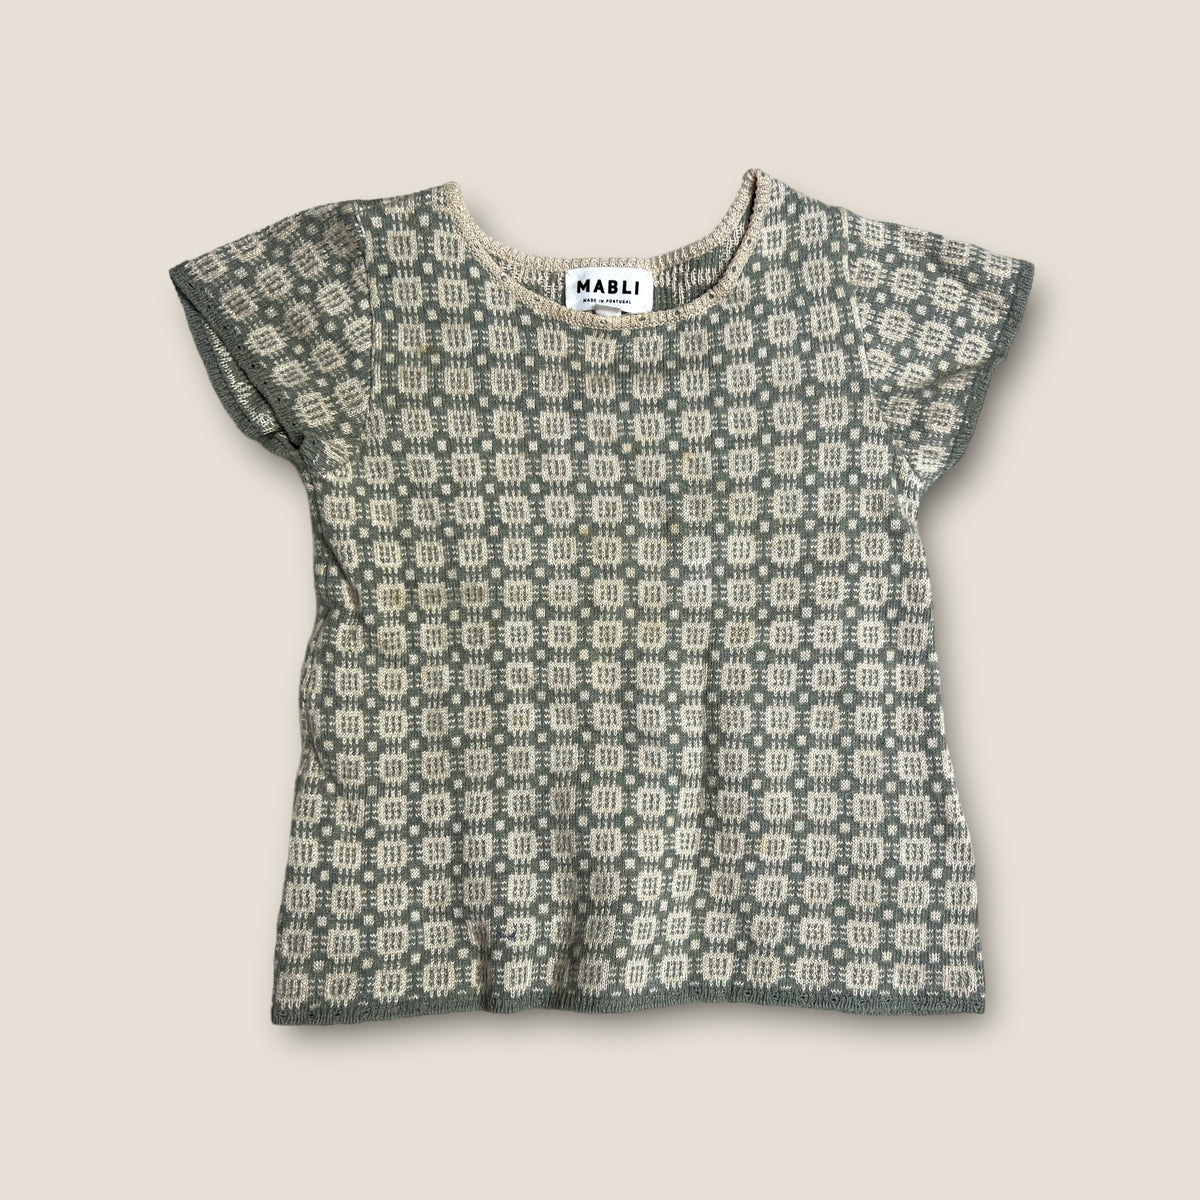 Mabli Cotton / Linen Knit Top size 2 years